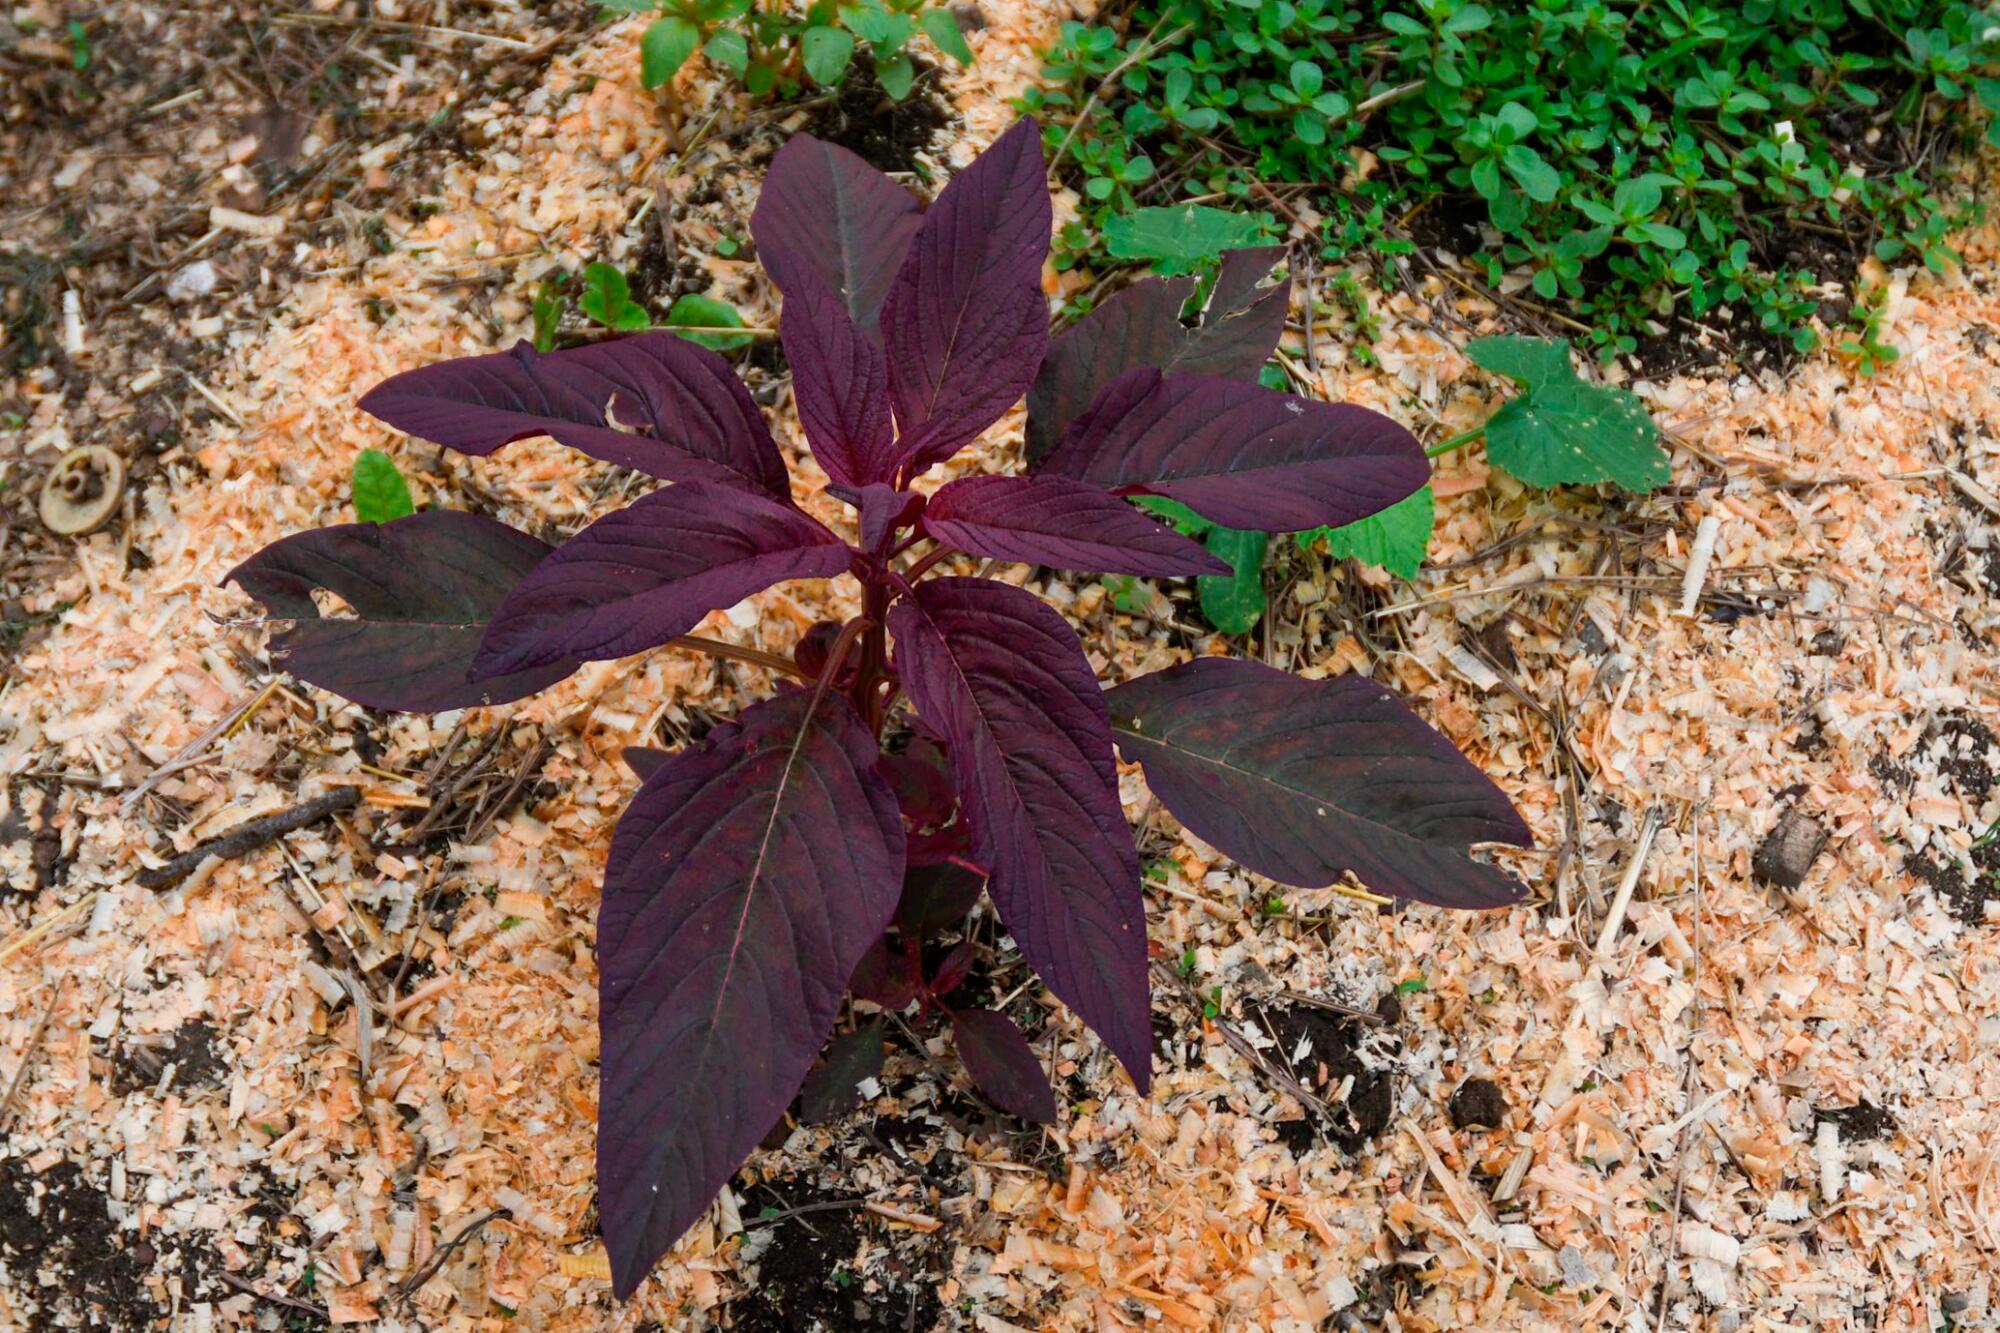 Amaranth plant with large purplish leaves in the ground